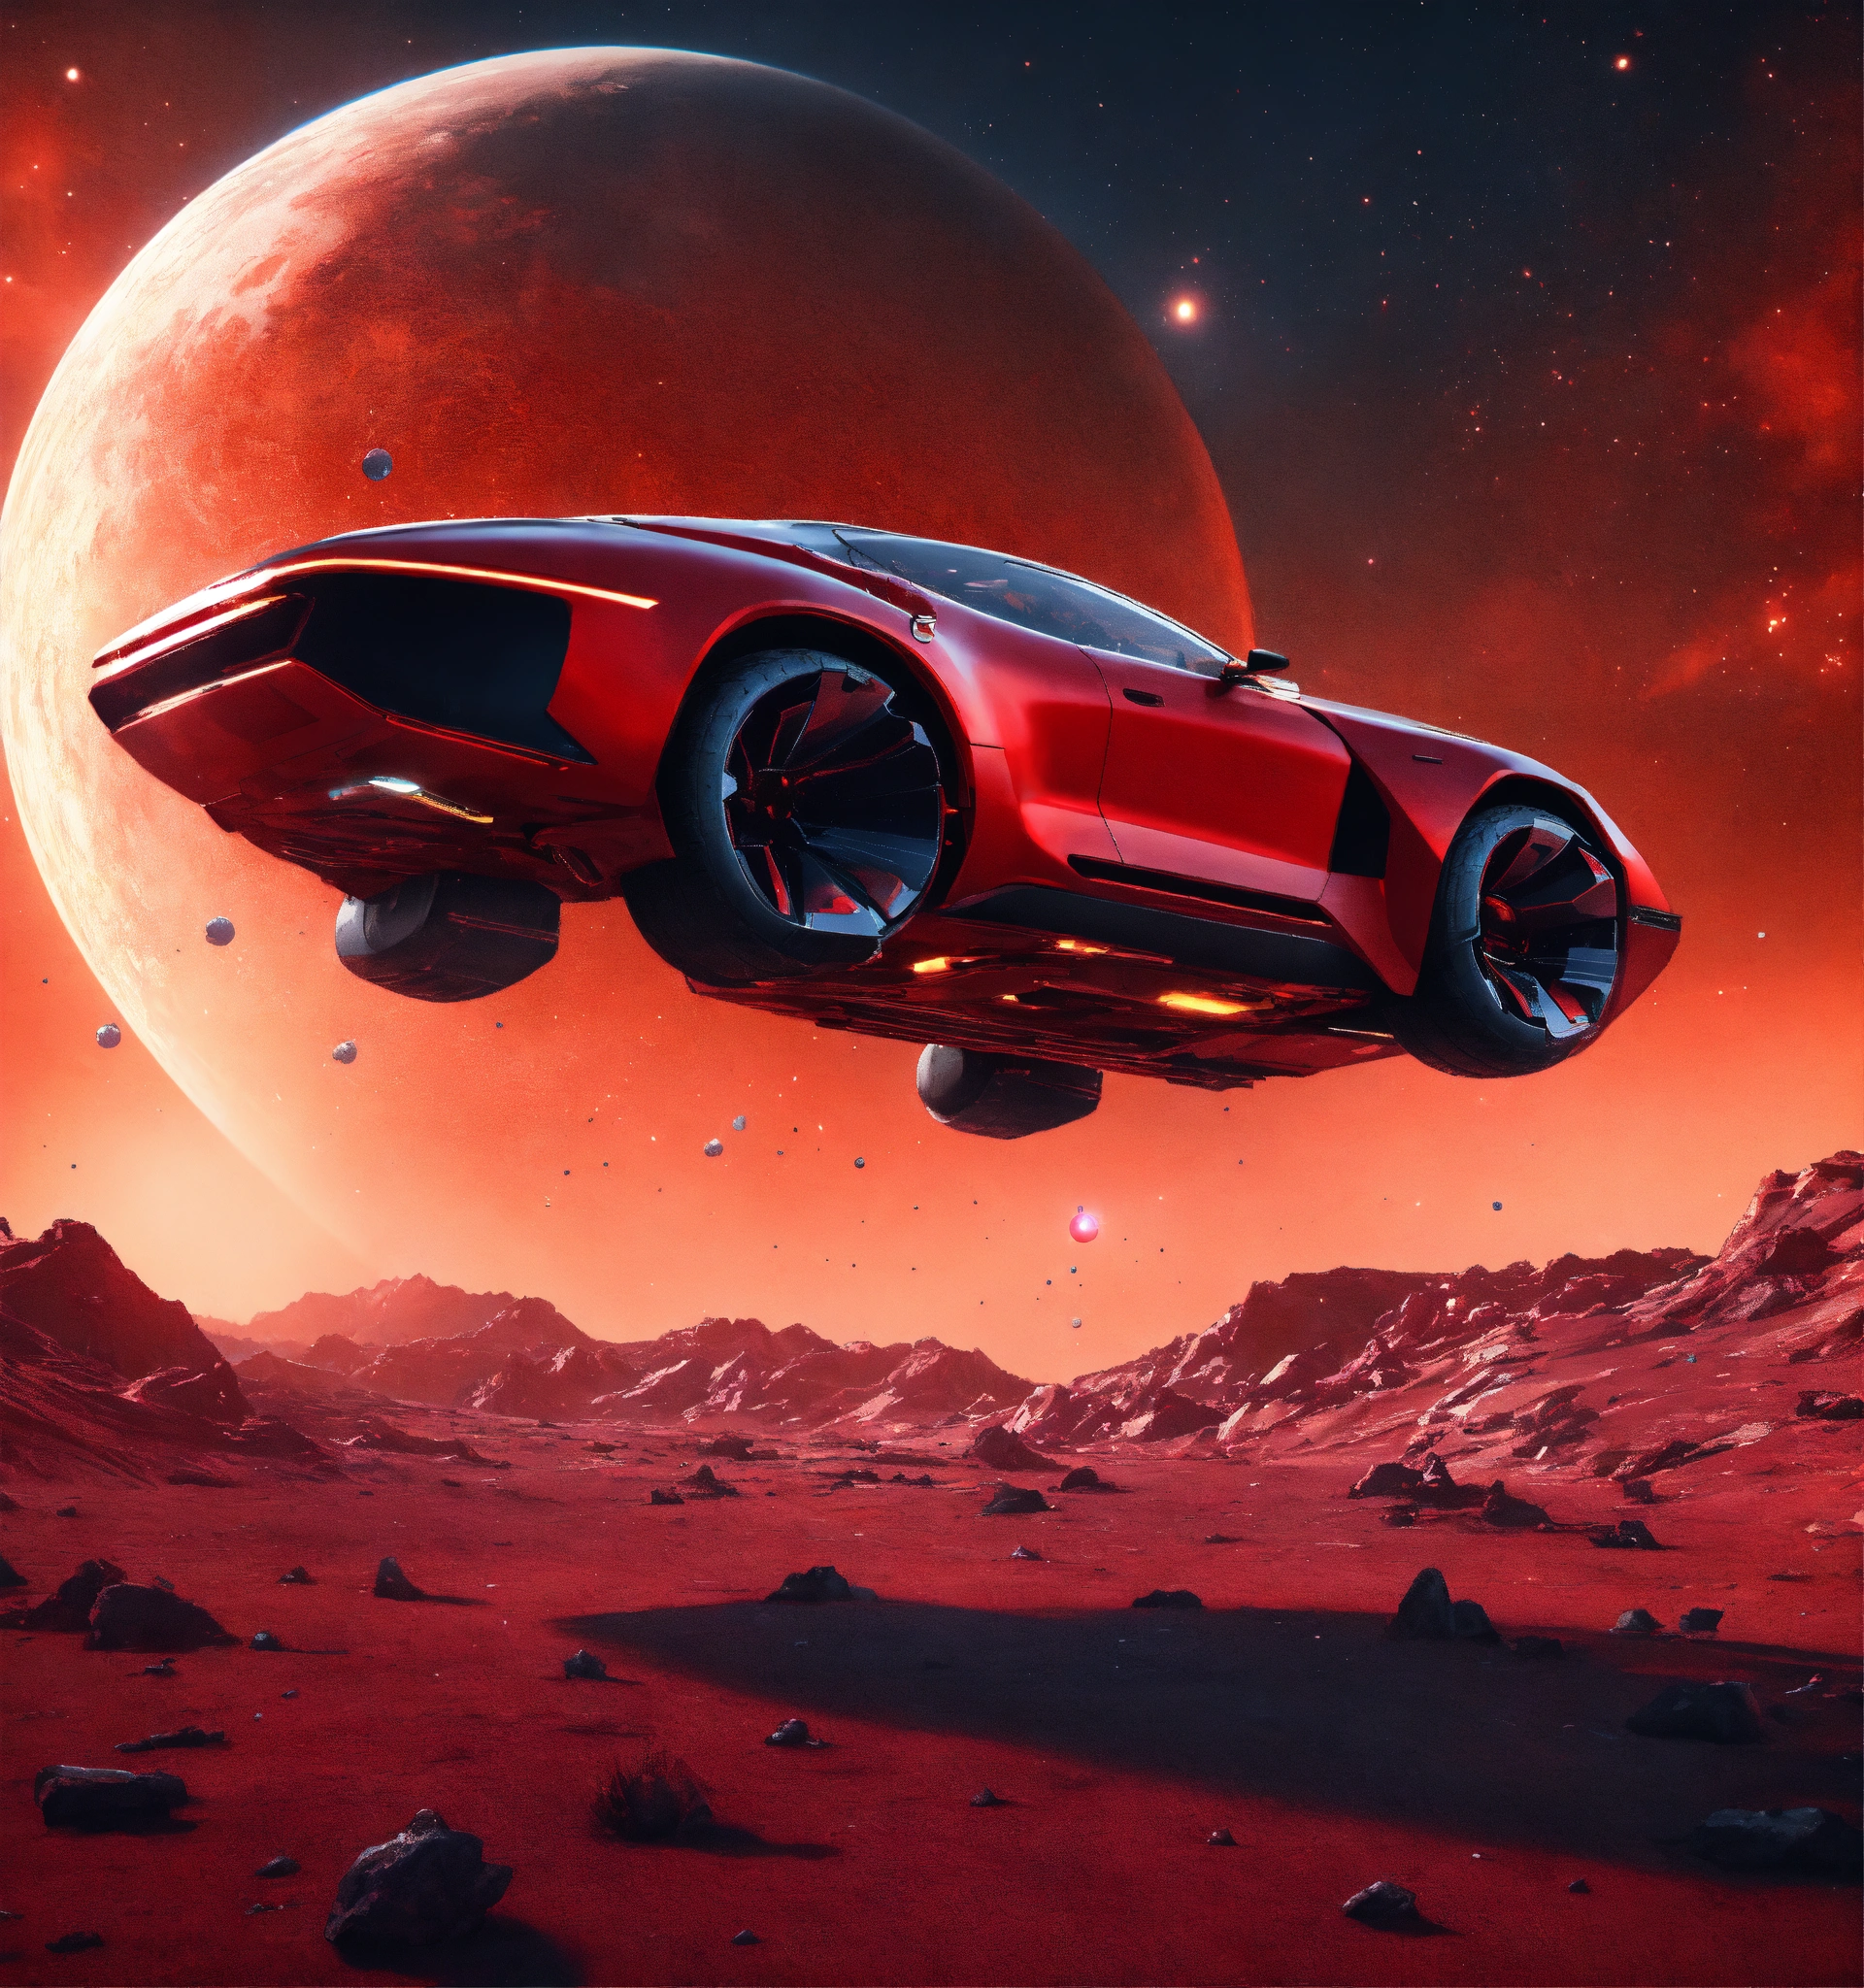 Lexica - Luxurious sleek red flying beat up futuristic clunker car ...